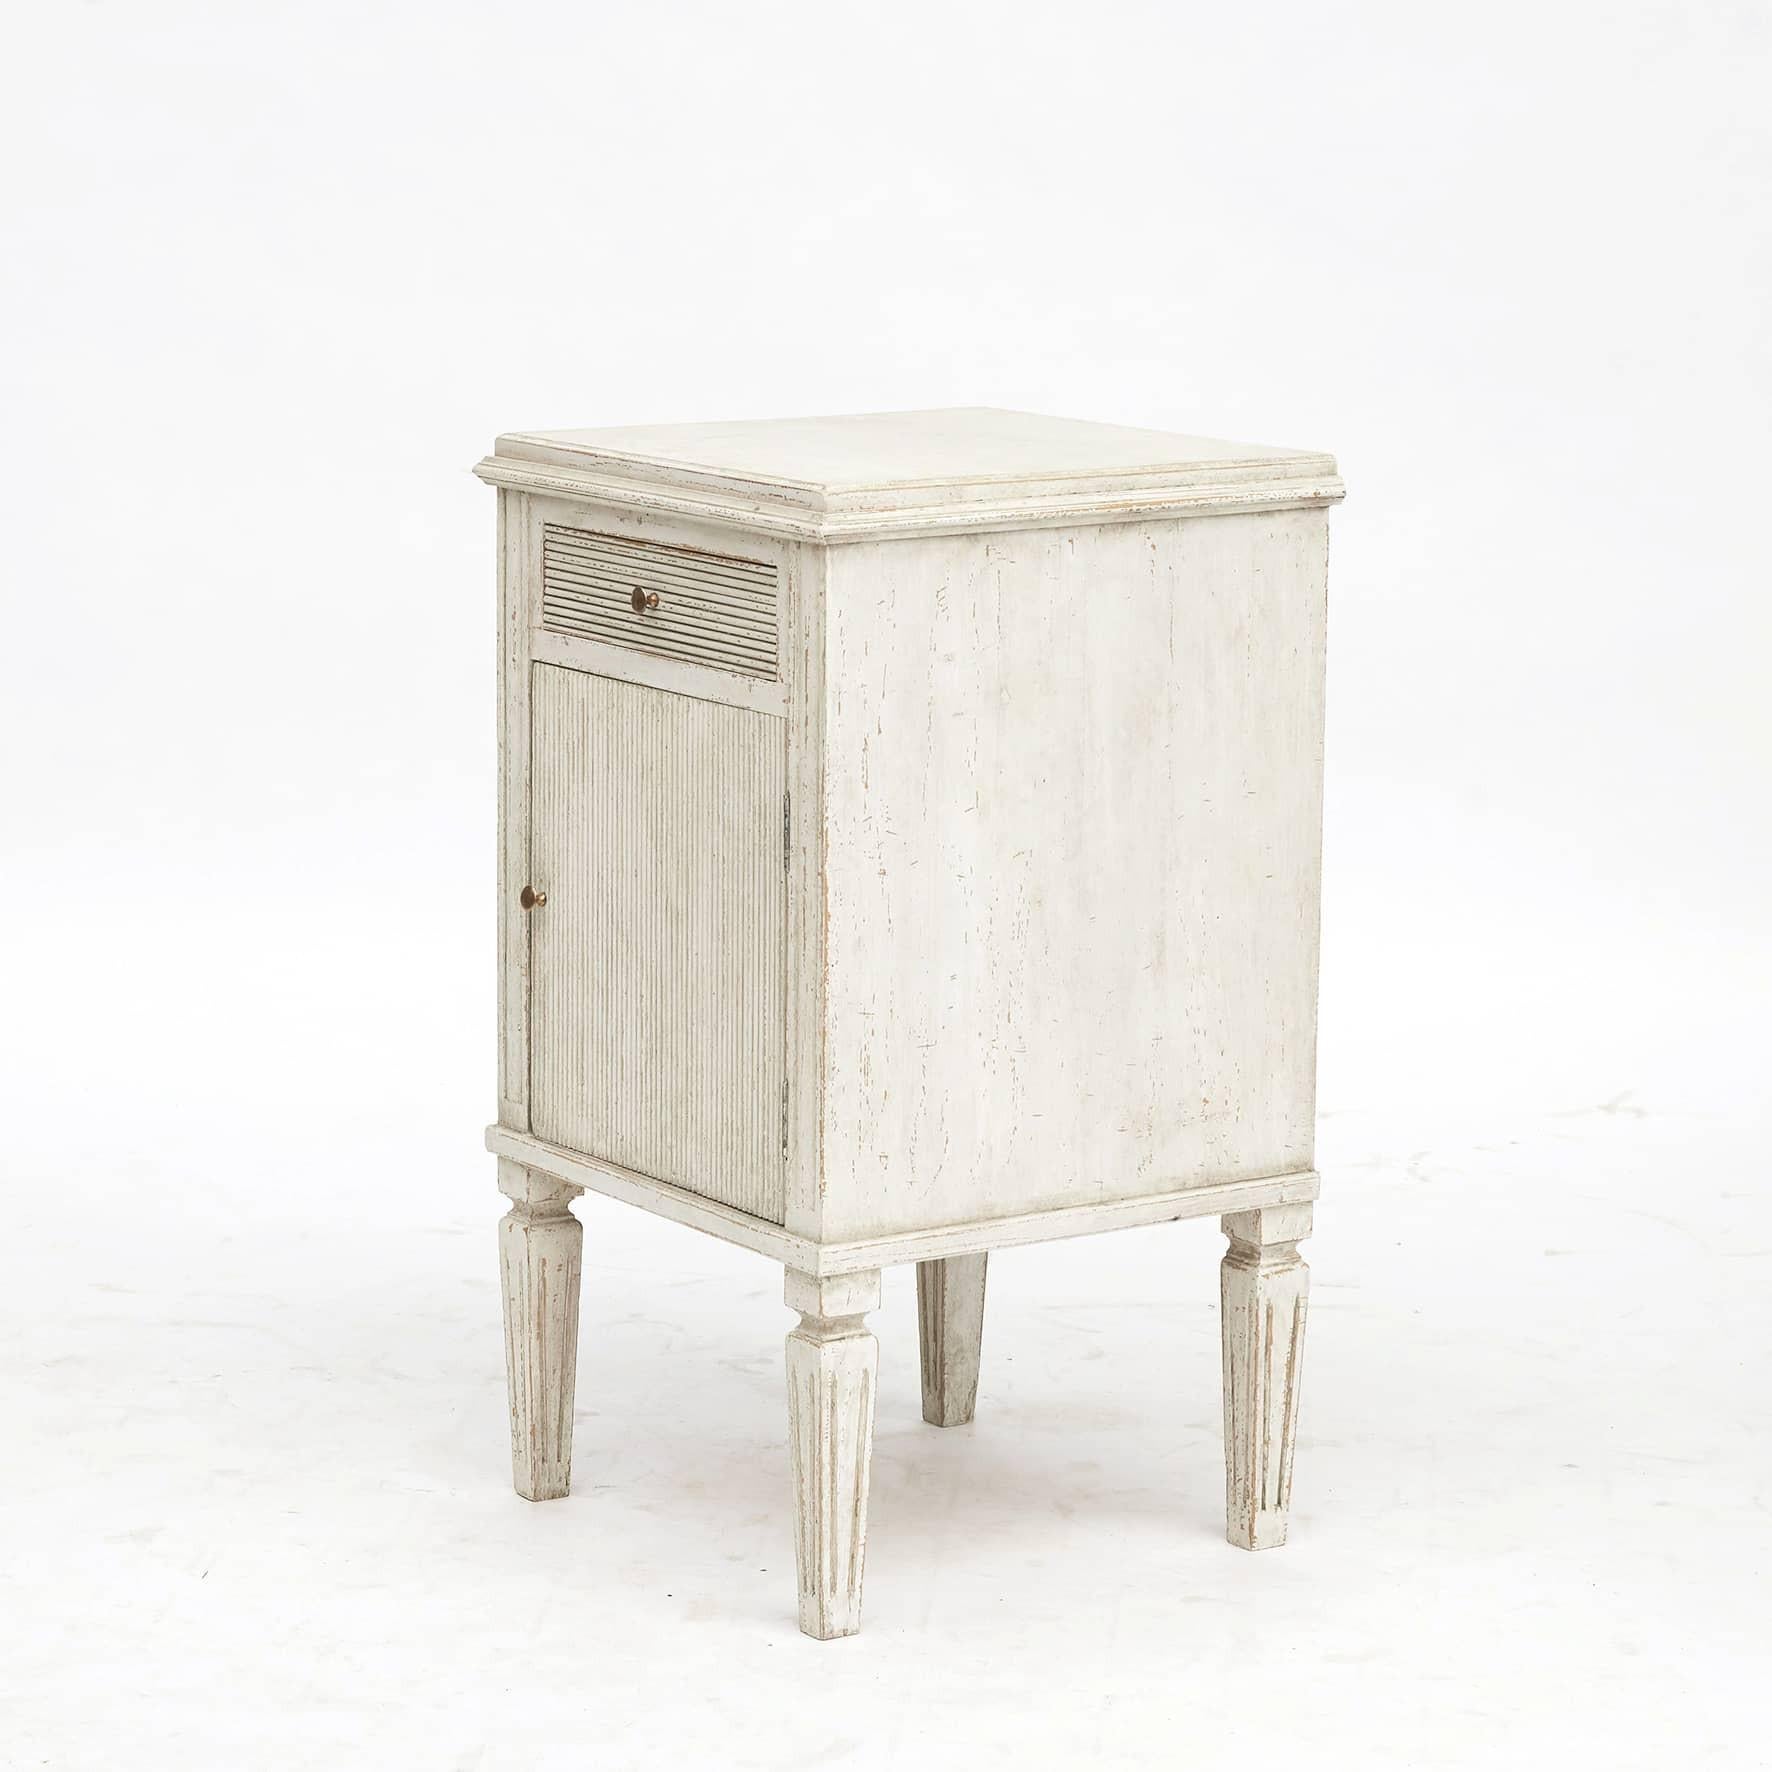 20th Century Pair Of Swedish Nightstands Or Bedside Cabinets, Gustavian Style